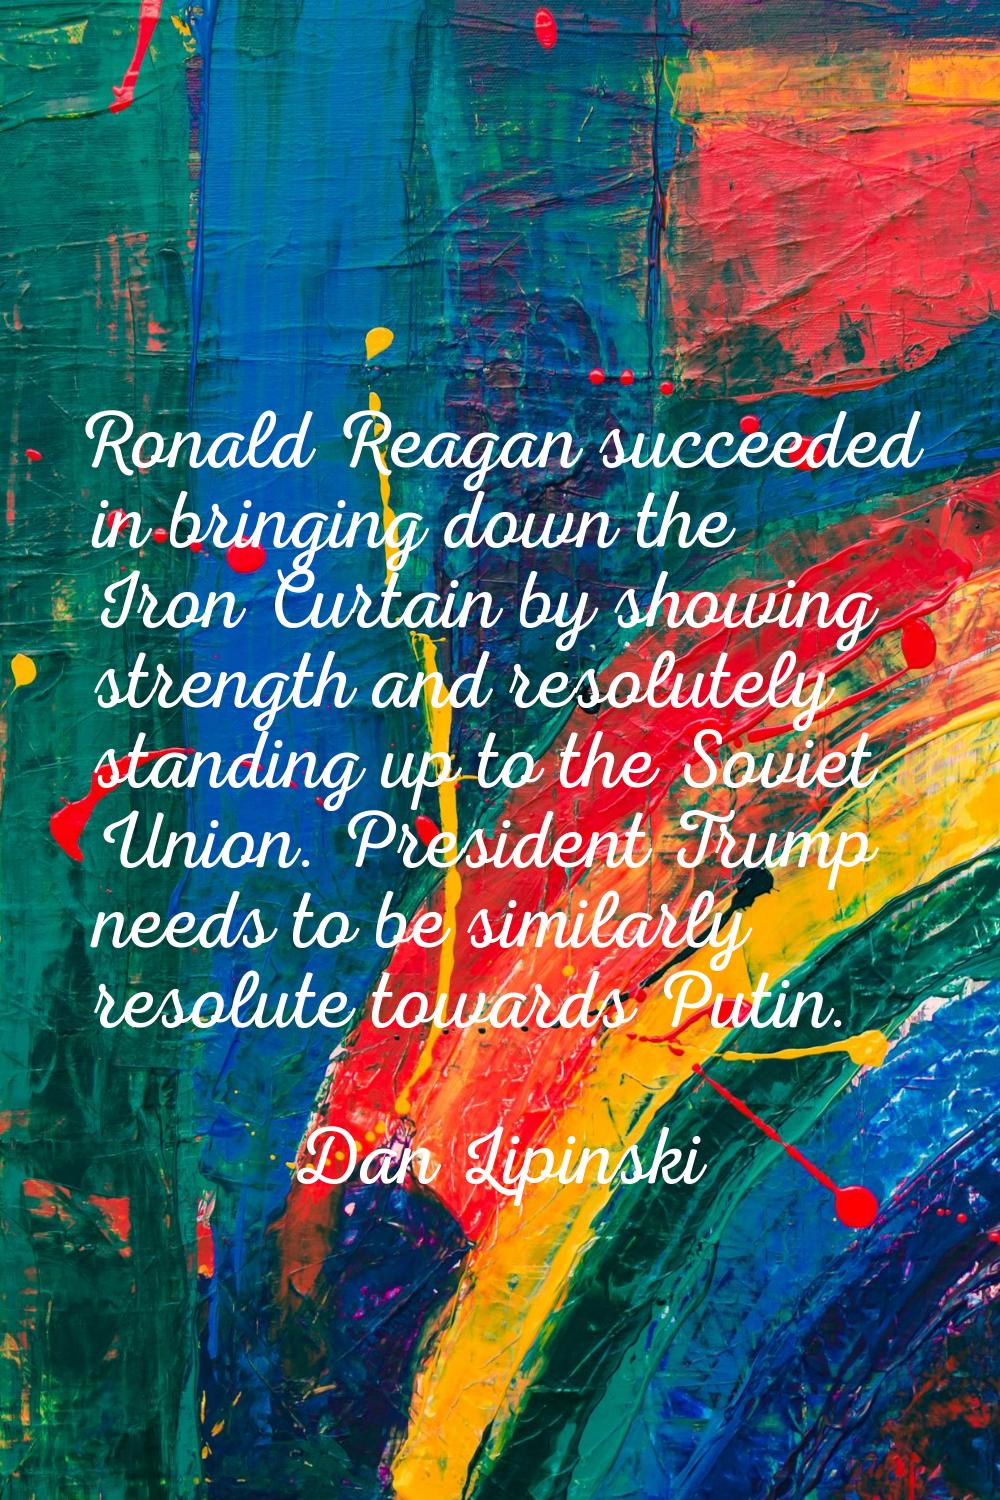 Ronald Reagan succeeded in bringing down the Iron Curtain by showing strength and resolutely standi